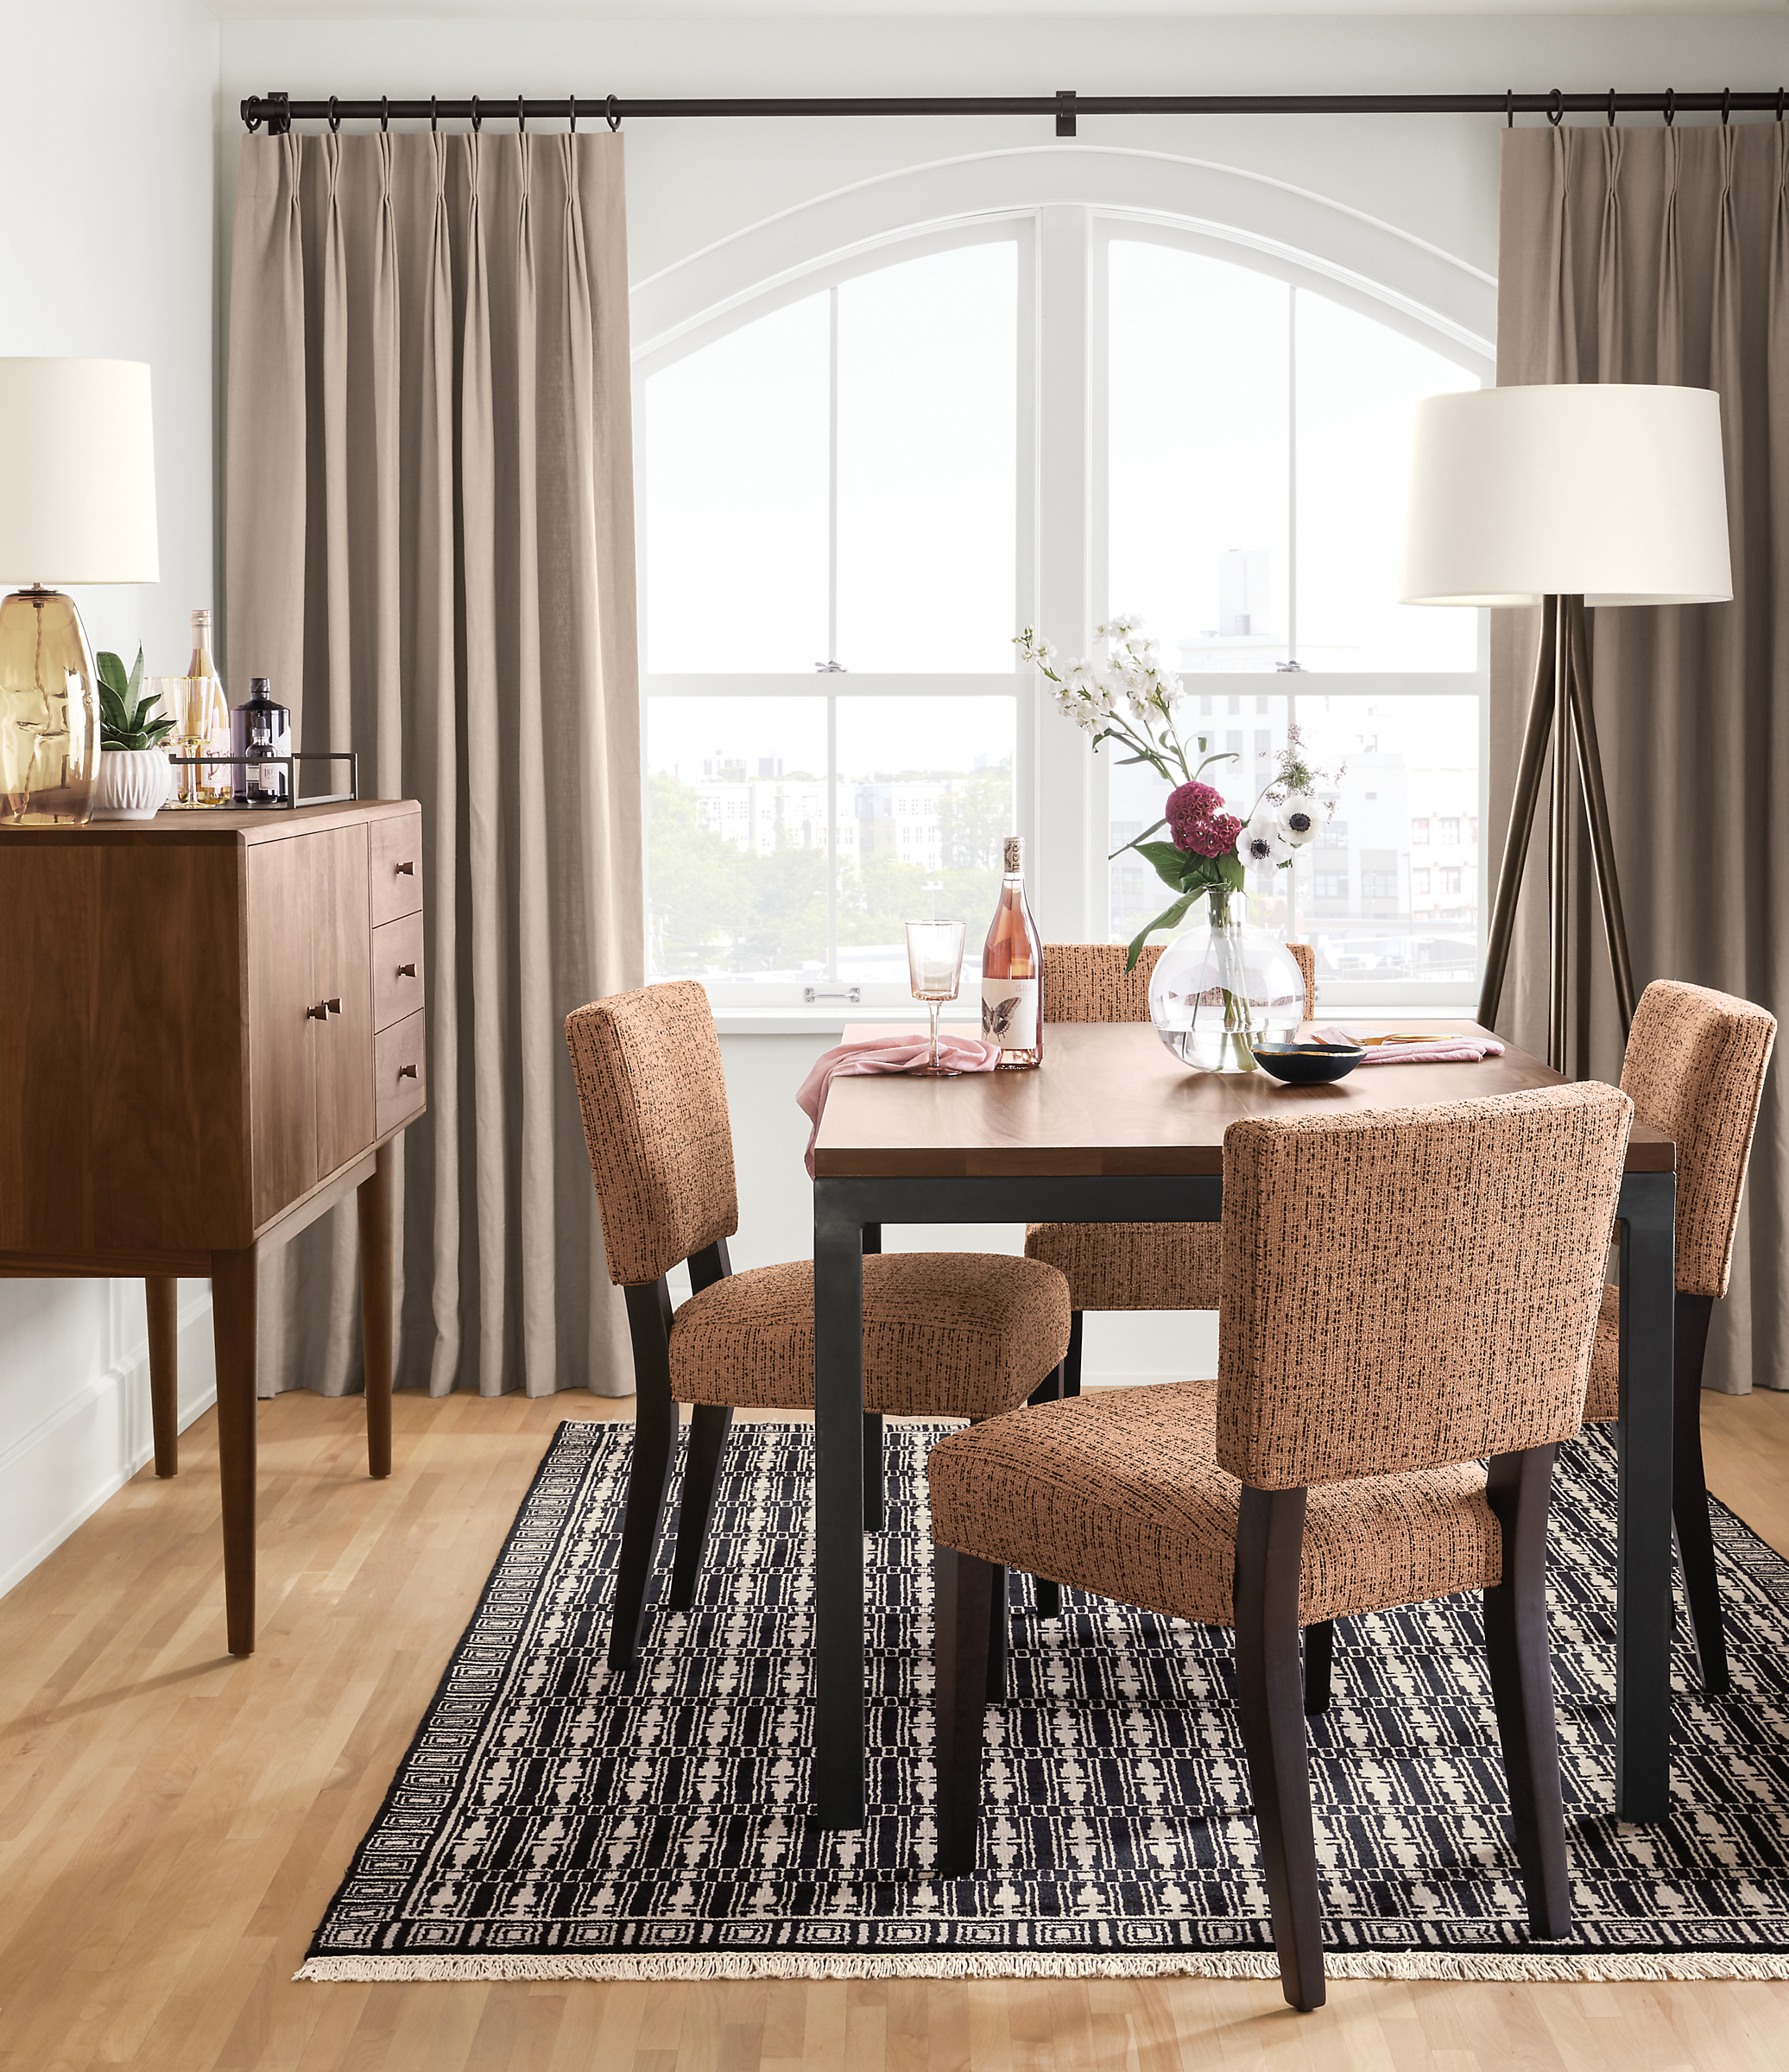 Detail of 4 Georgia side chairs in Sym Blush fabric in small dining room.